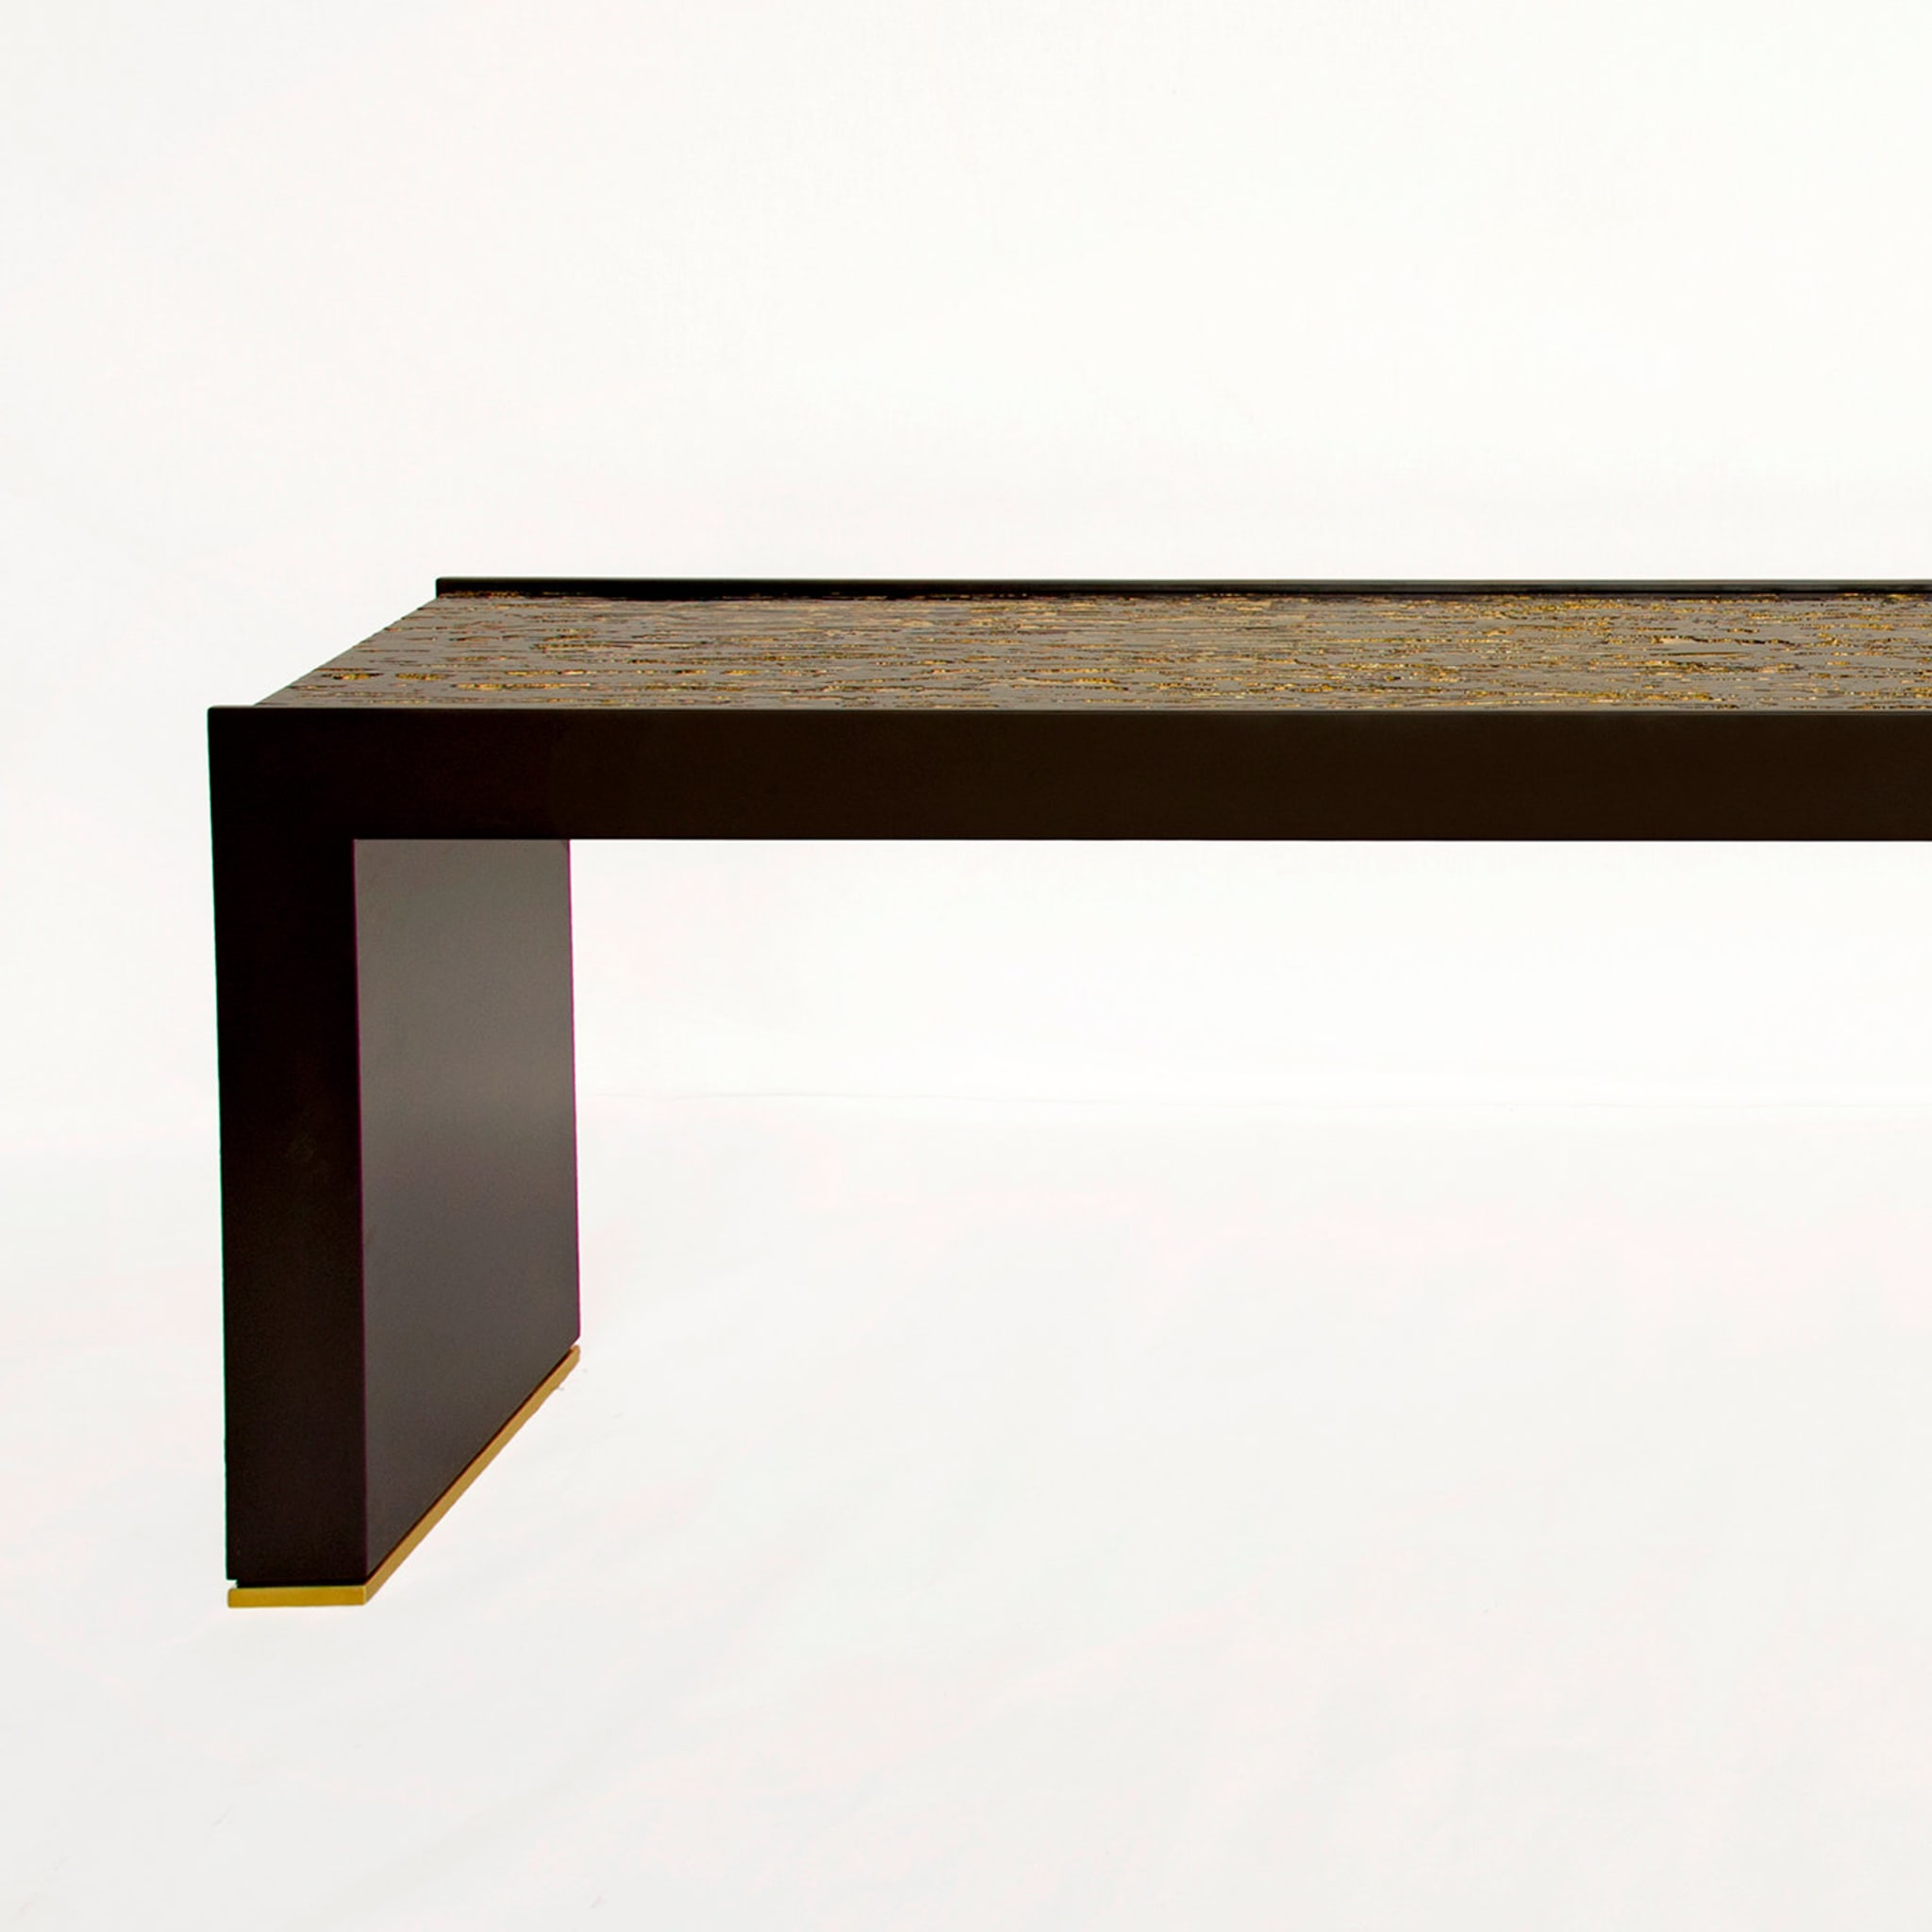 Console table in black and gold wood - Alternative view 1